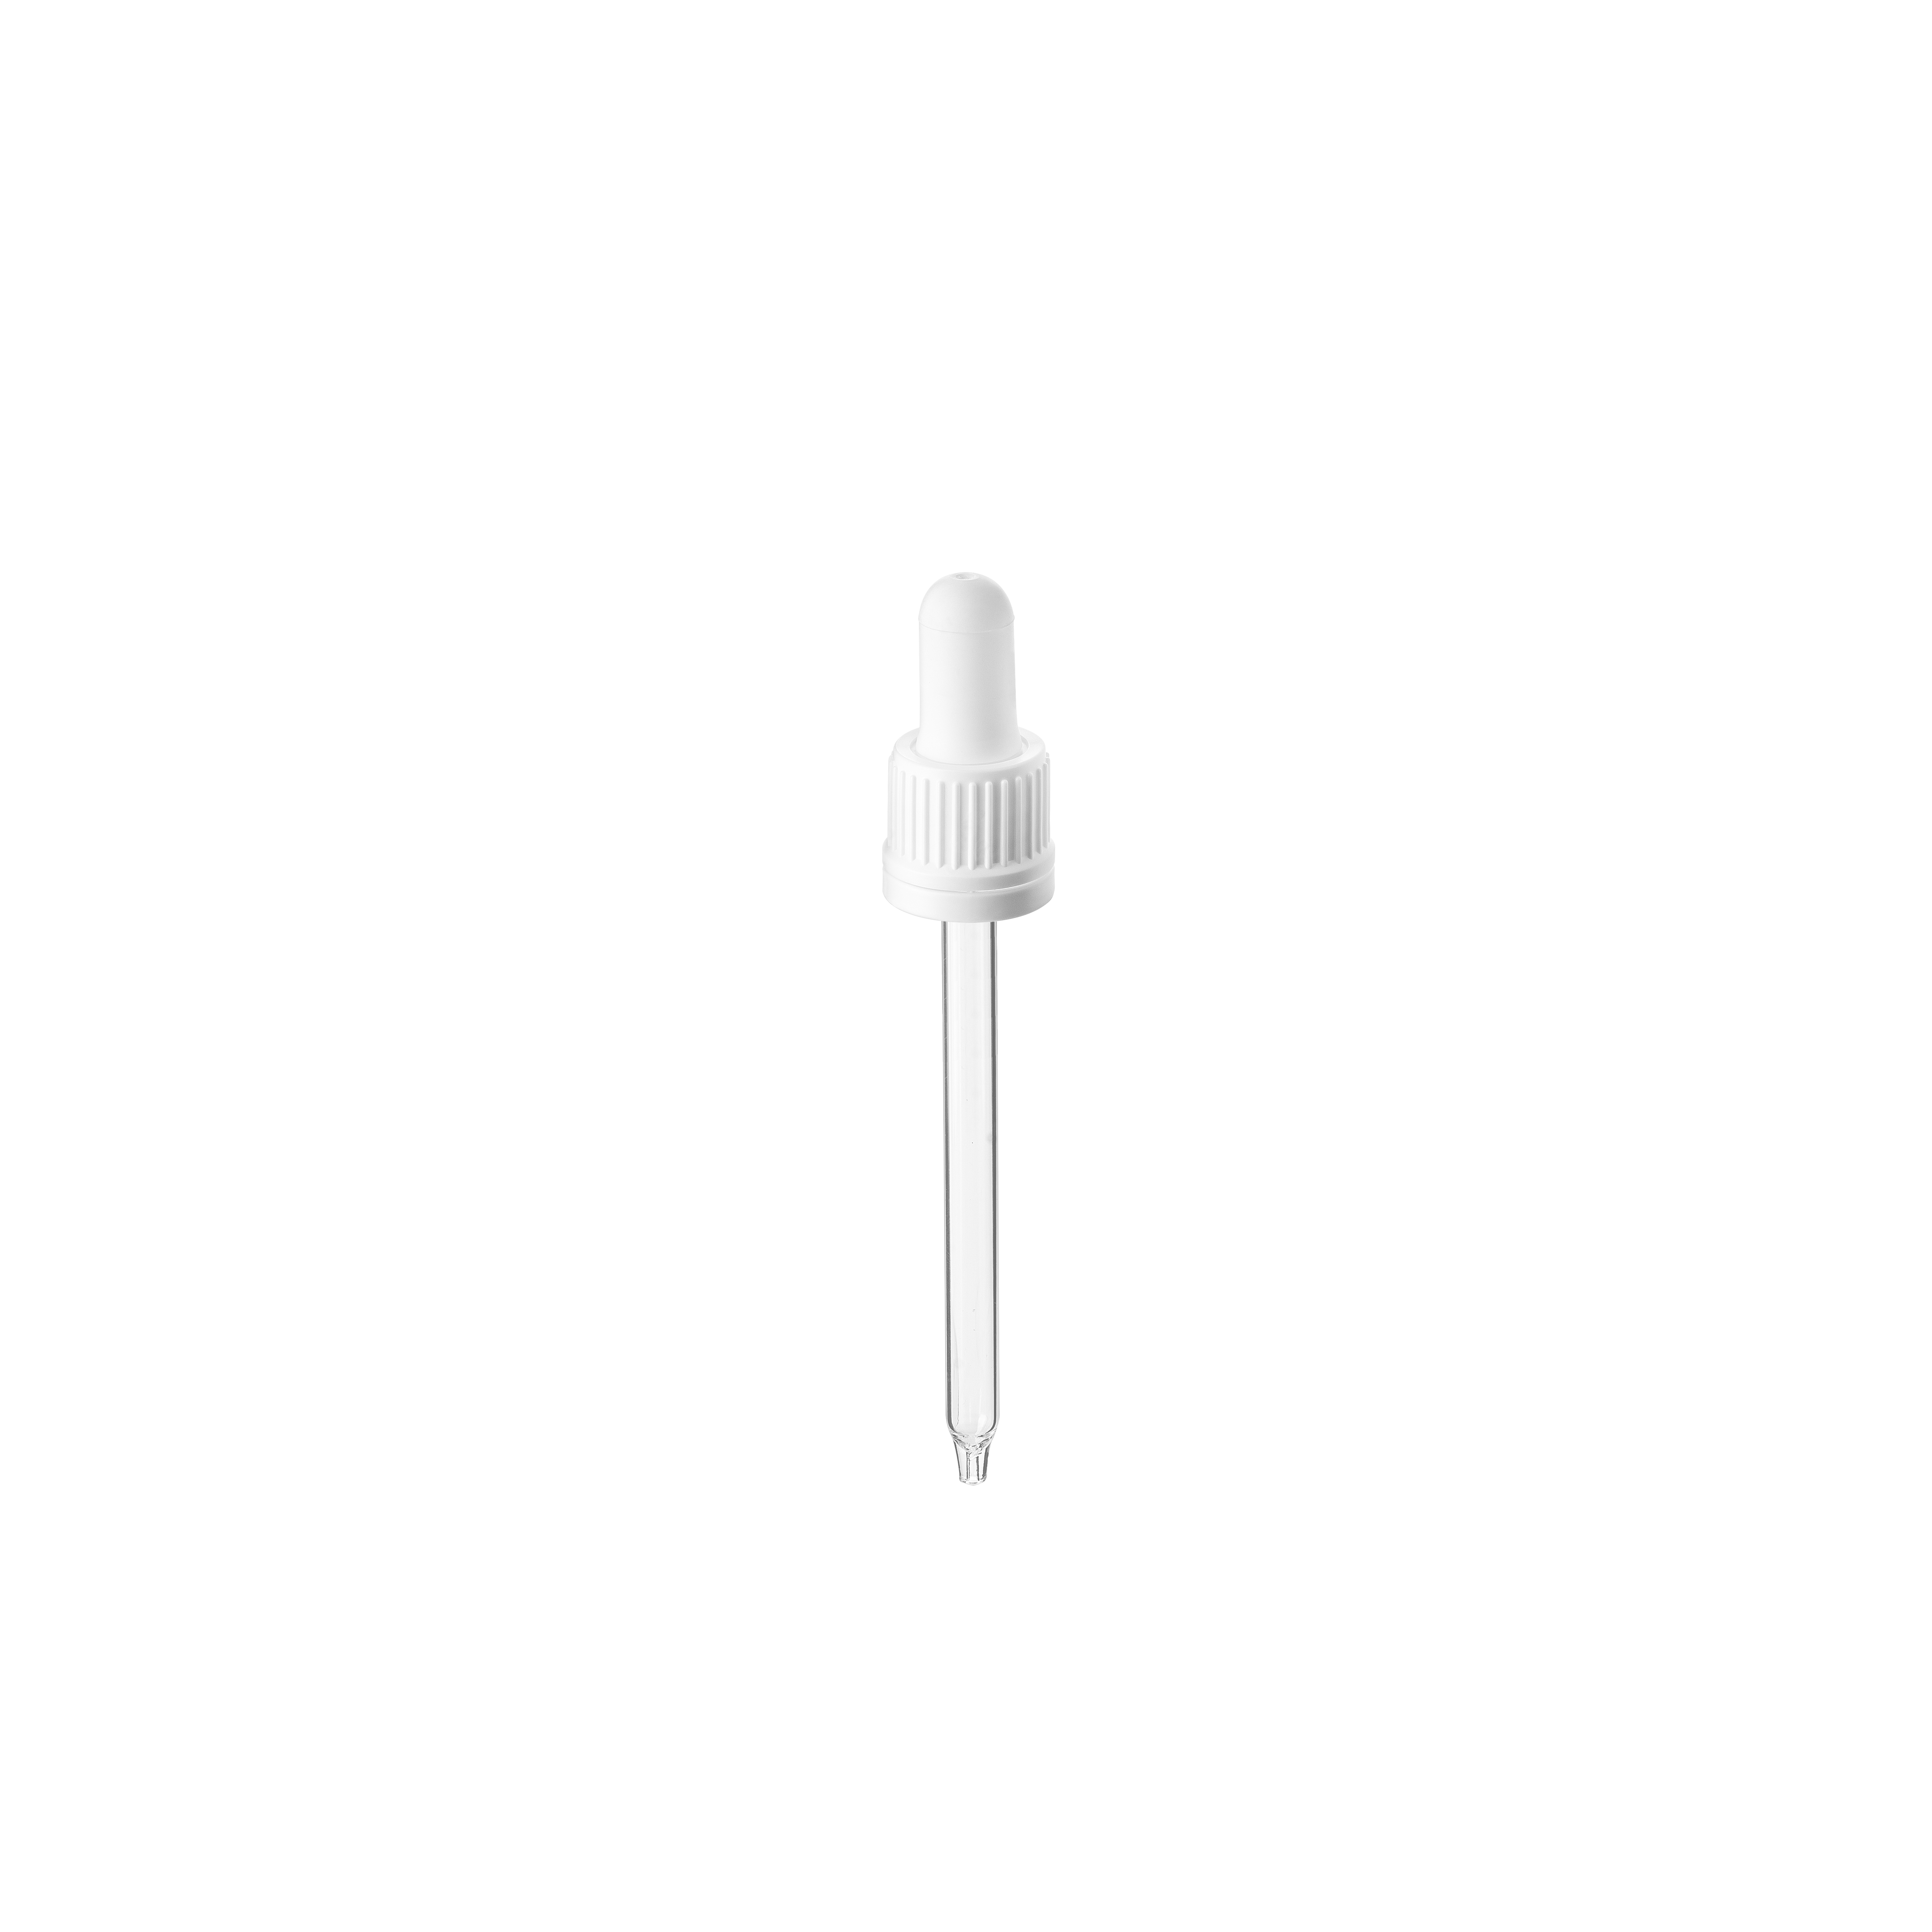 Pipette series II, DIN18, tamper-evident, PP, white, ribbed, white bulb TPE 1.0 ml, conical tip with 1.0 opening for Ginger 100 ml